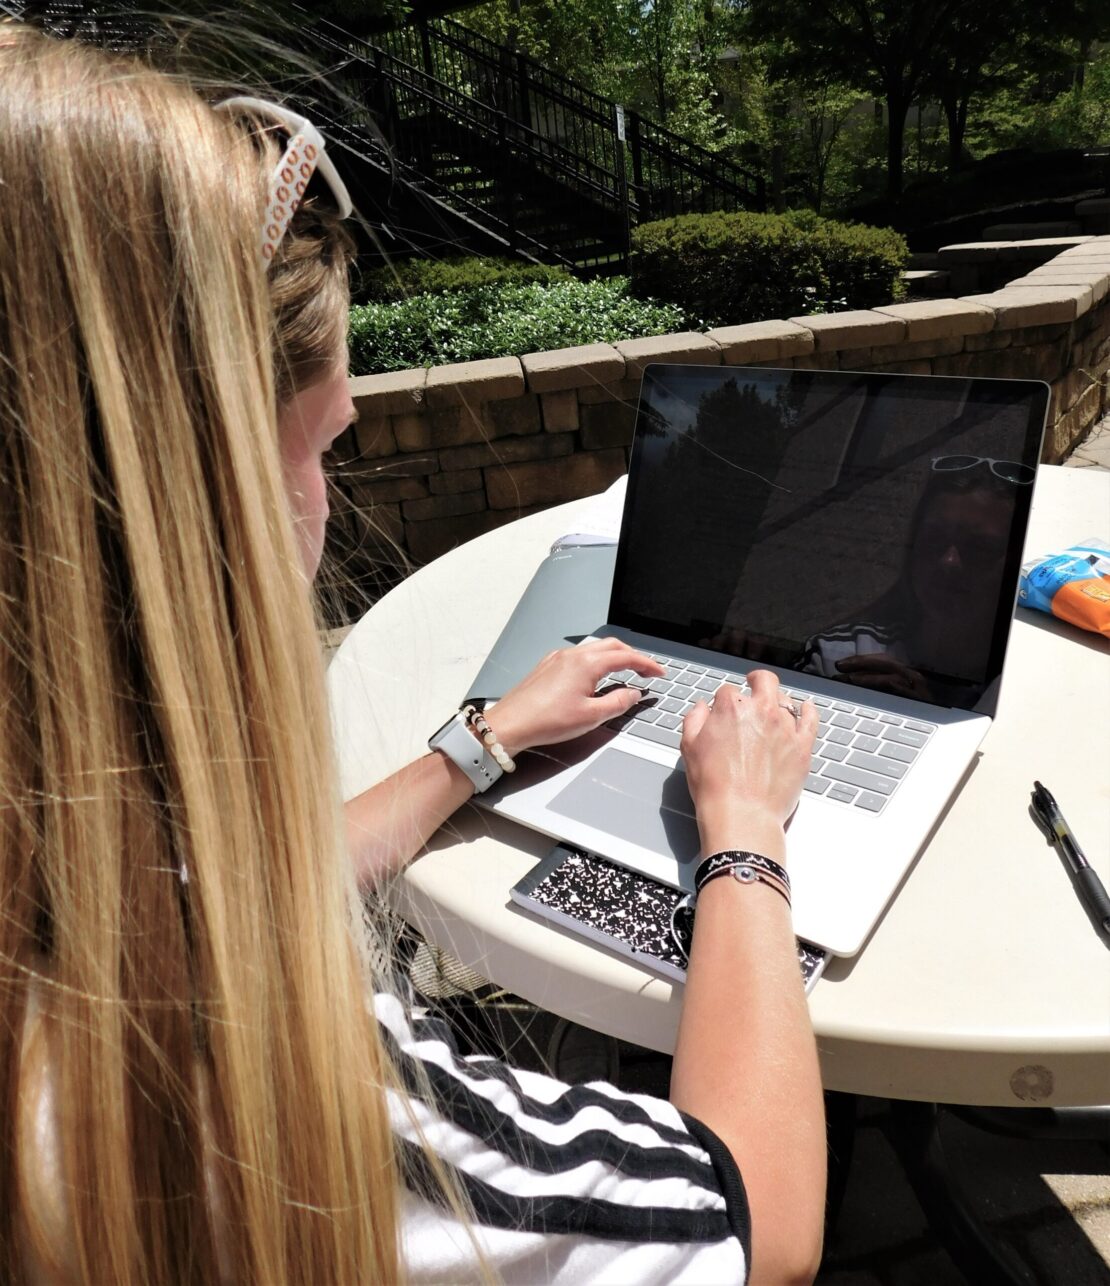 Blond woman working on laptop outside